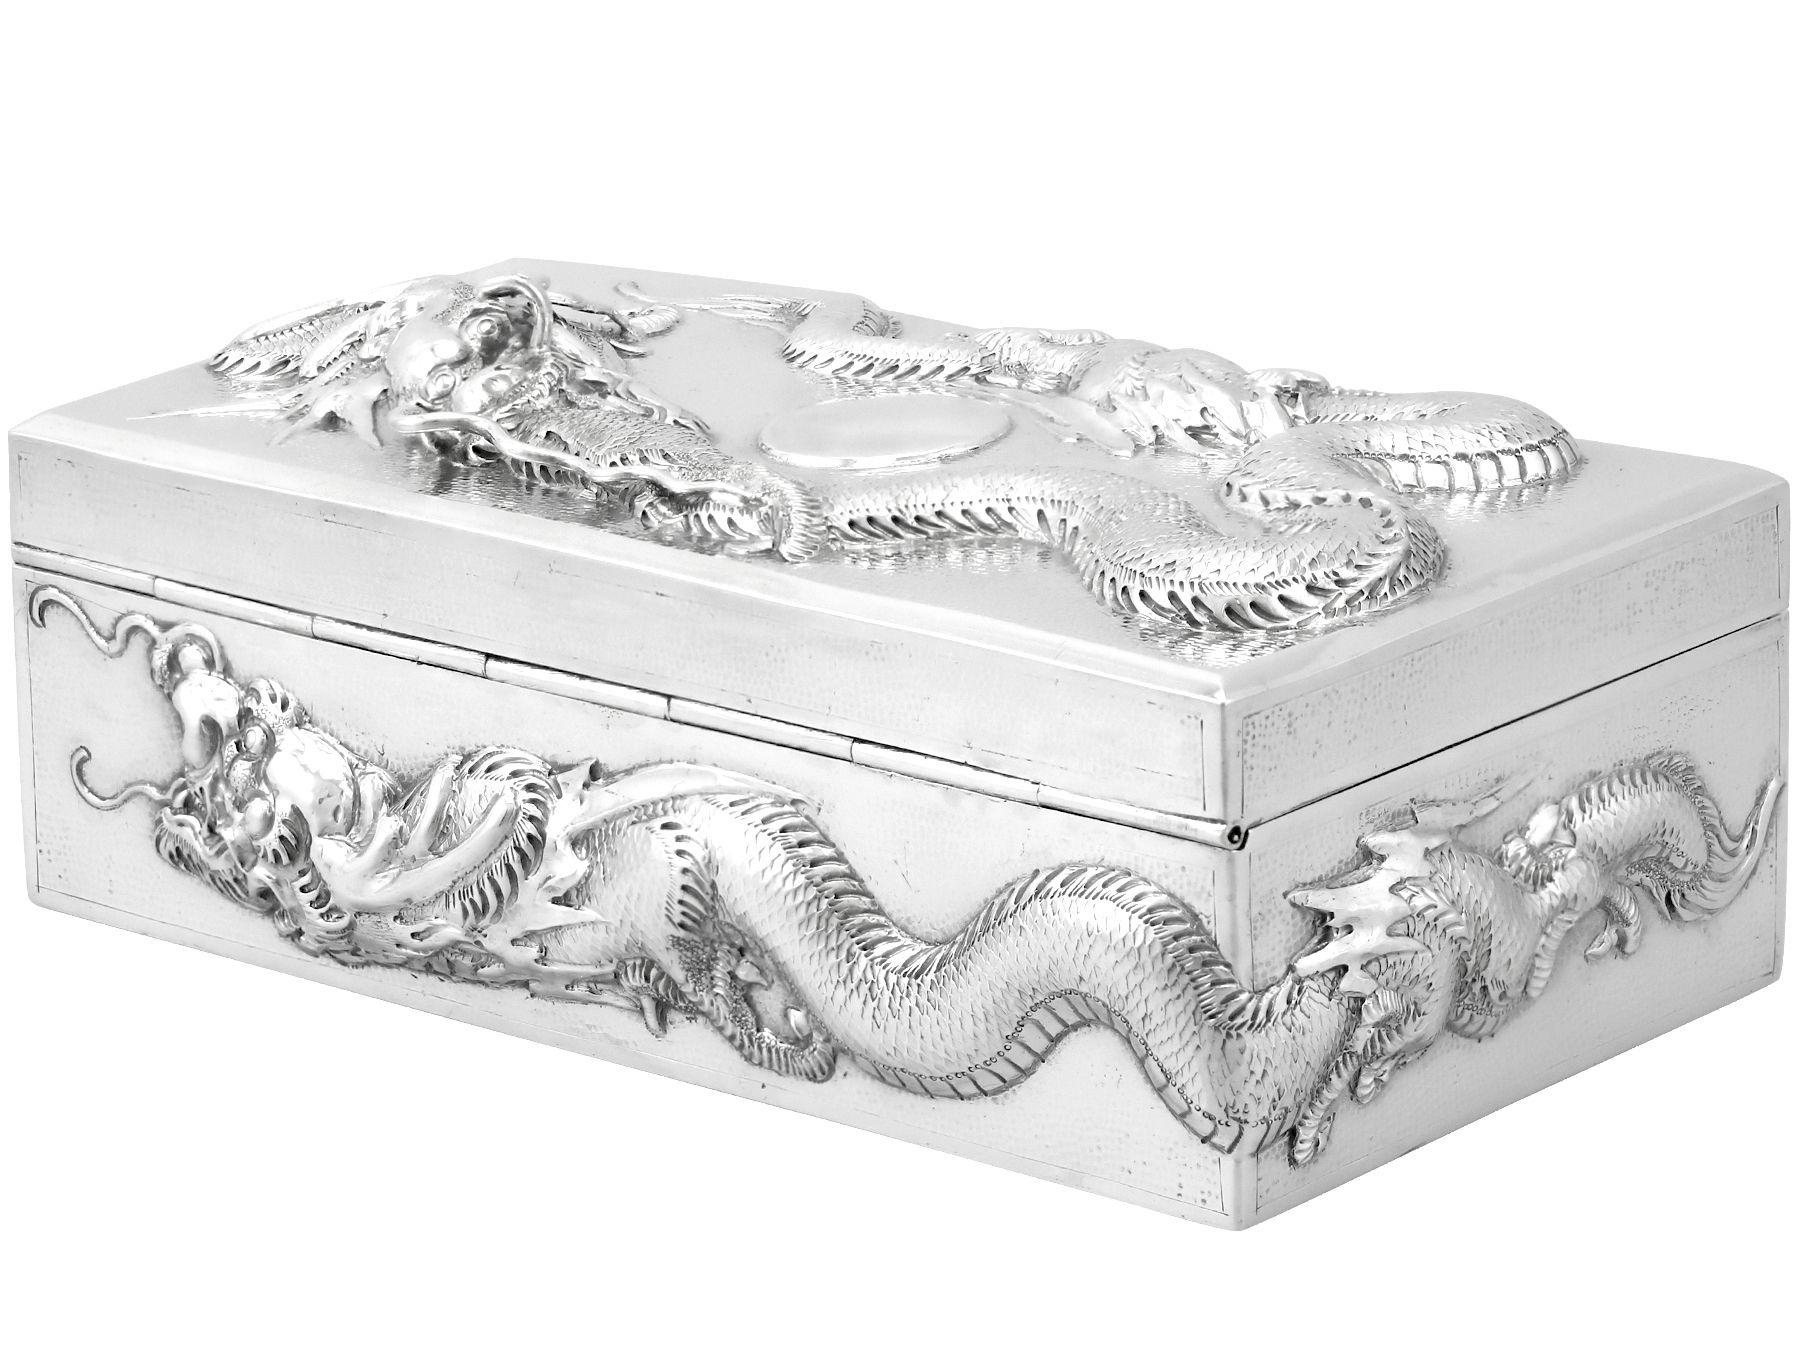 1920s Chinese Export Silver Box In Excellent Condition For Sale In Jesmond, Newcastle Upon Tyne